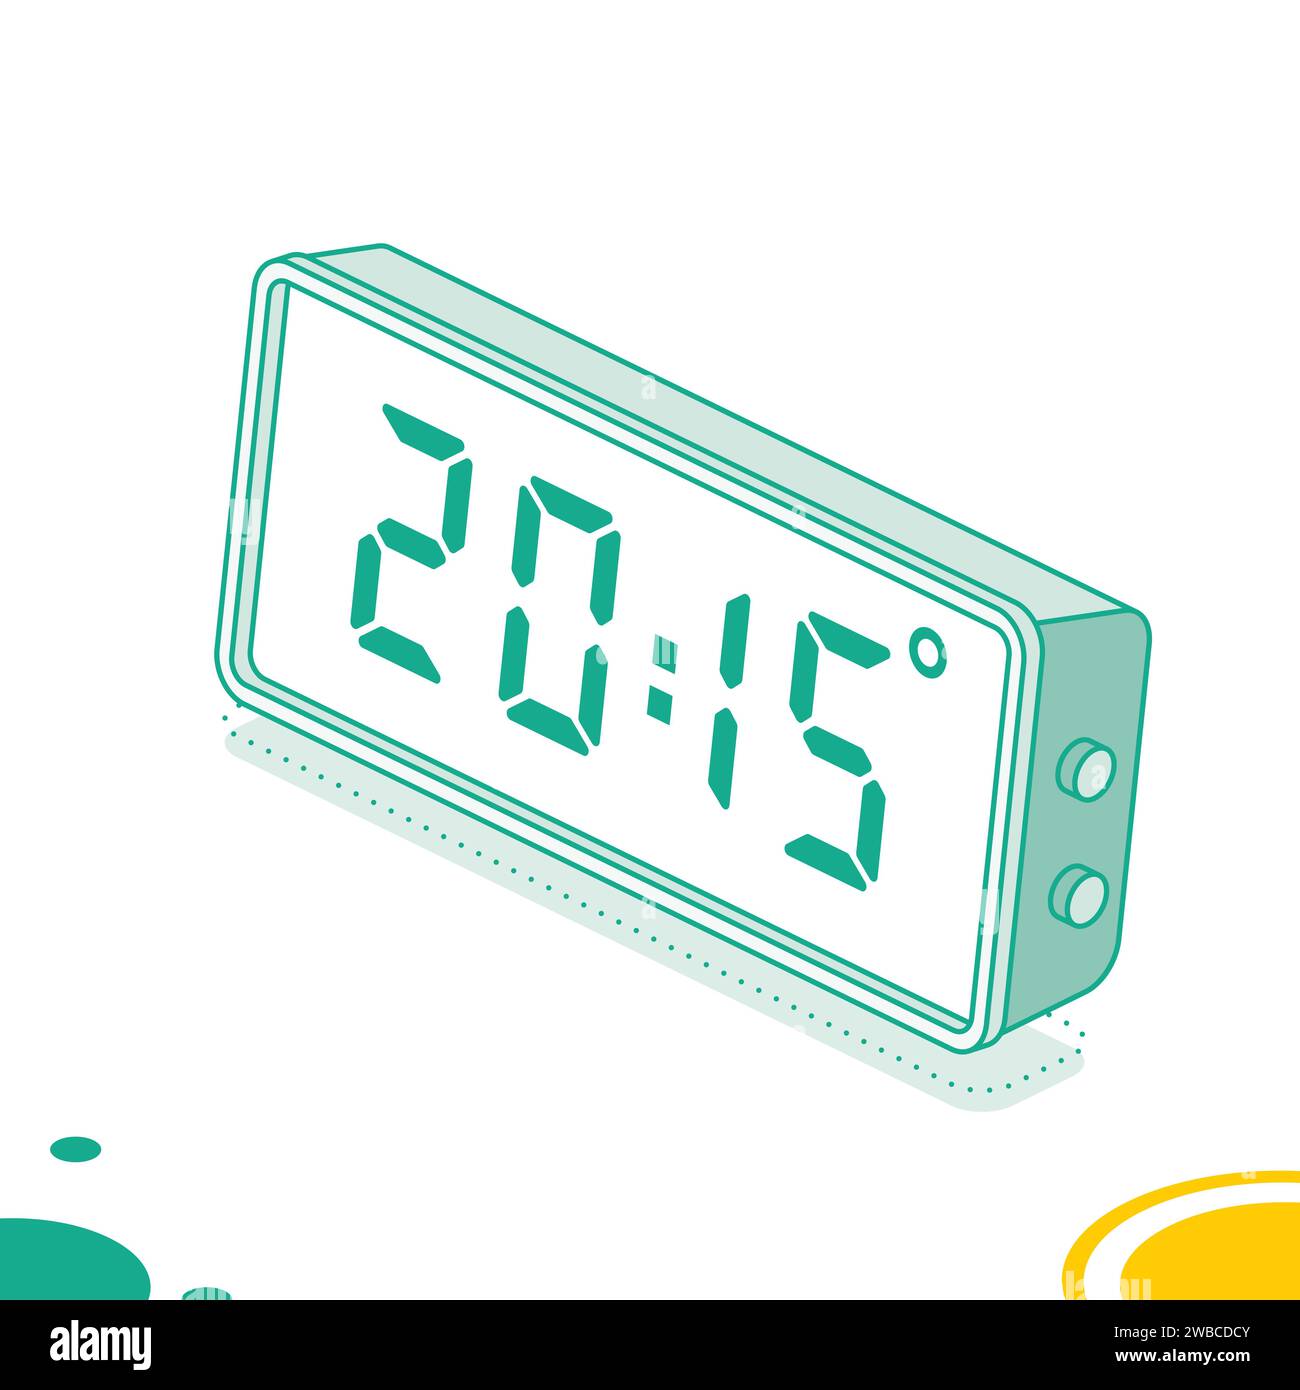 Isometric desktop electronic clock with large LED display. White body. Digital alarm clock icon isolated on white background. Electronic watch. Time i Stock Vector